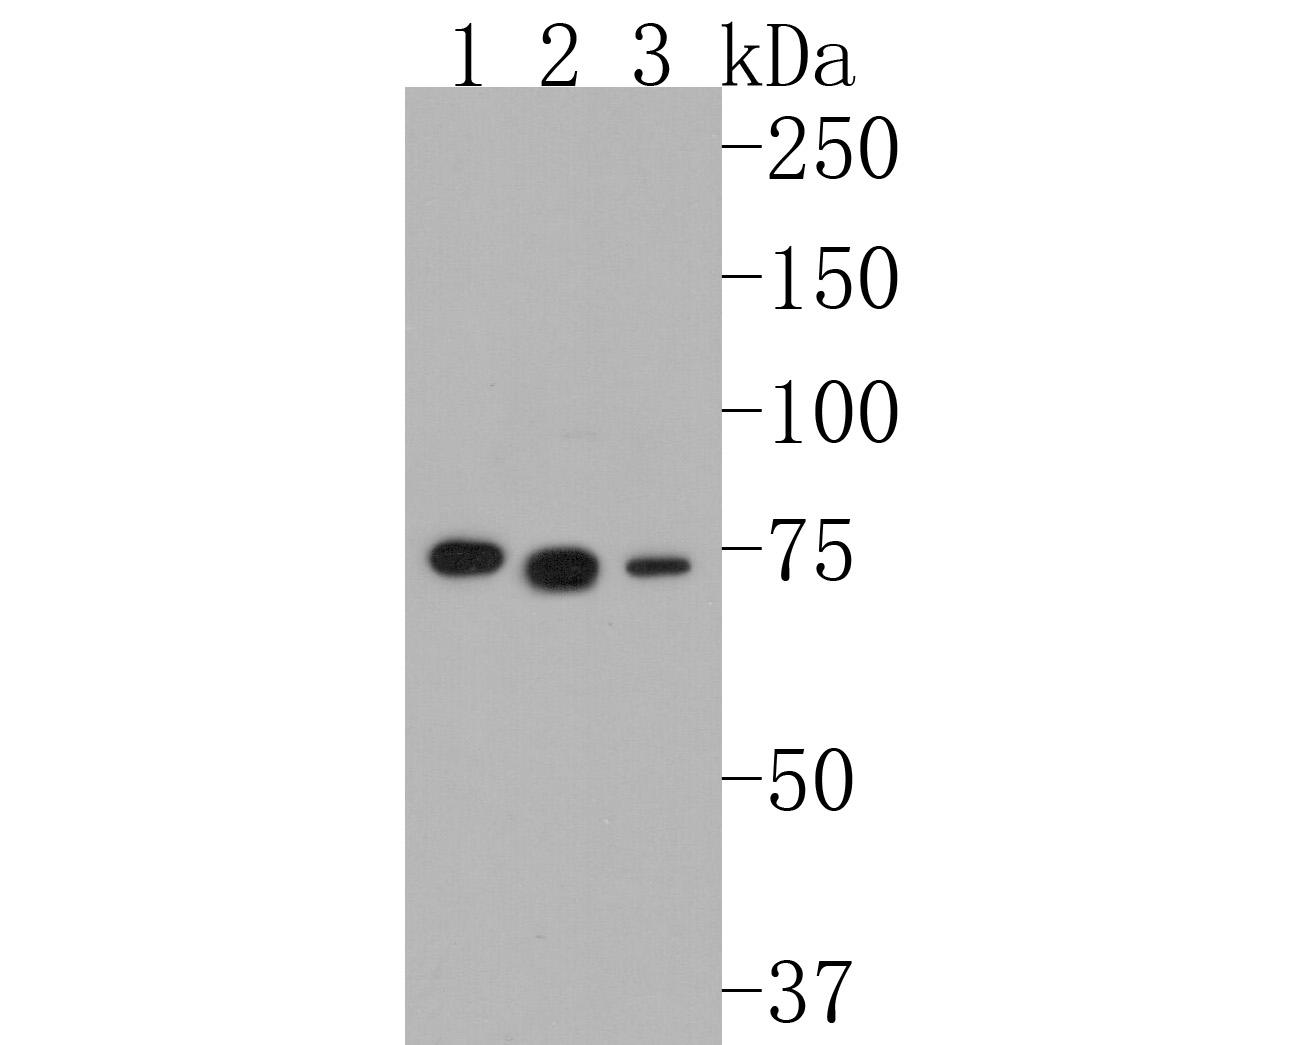 Western blot analysis of BTK on different lysates. Proteins were transferred to a PVDF membrane and blocked with 5% BSA in PBS for 1 hour at room temperature. The primary antibody (ET1611-4, 1/500) was used in 5% BSA at room temperature for 2 hours. Goat Anti-Rabbit IgG - HRP Secondary Antibody (HA1001) at 1:5,000 dilution was used for 1 hour at room temperature.<br />
Positive control: <br />
Lane 1: Daudi cell lysate<br />
Lane 2: Raji cell lysate<br />
Lane 3: U937 cell lysate